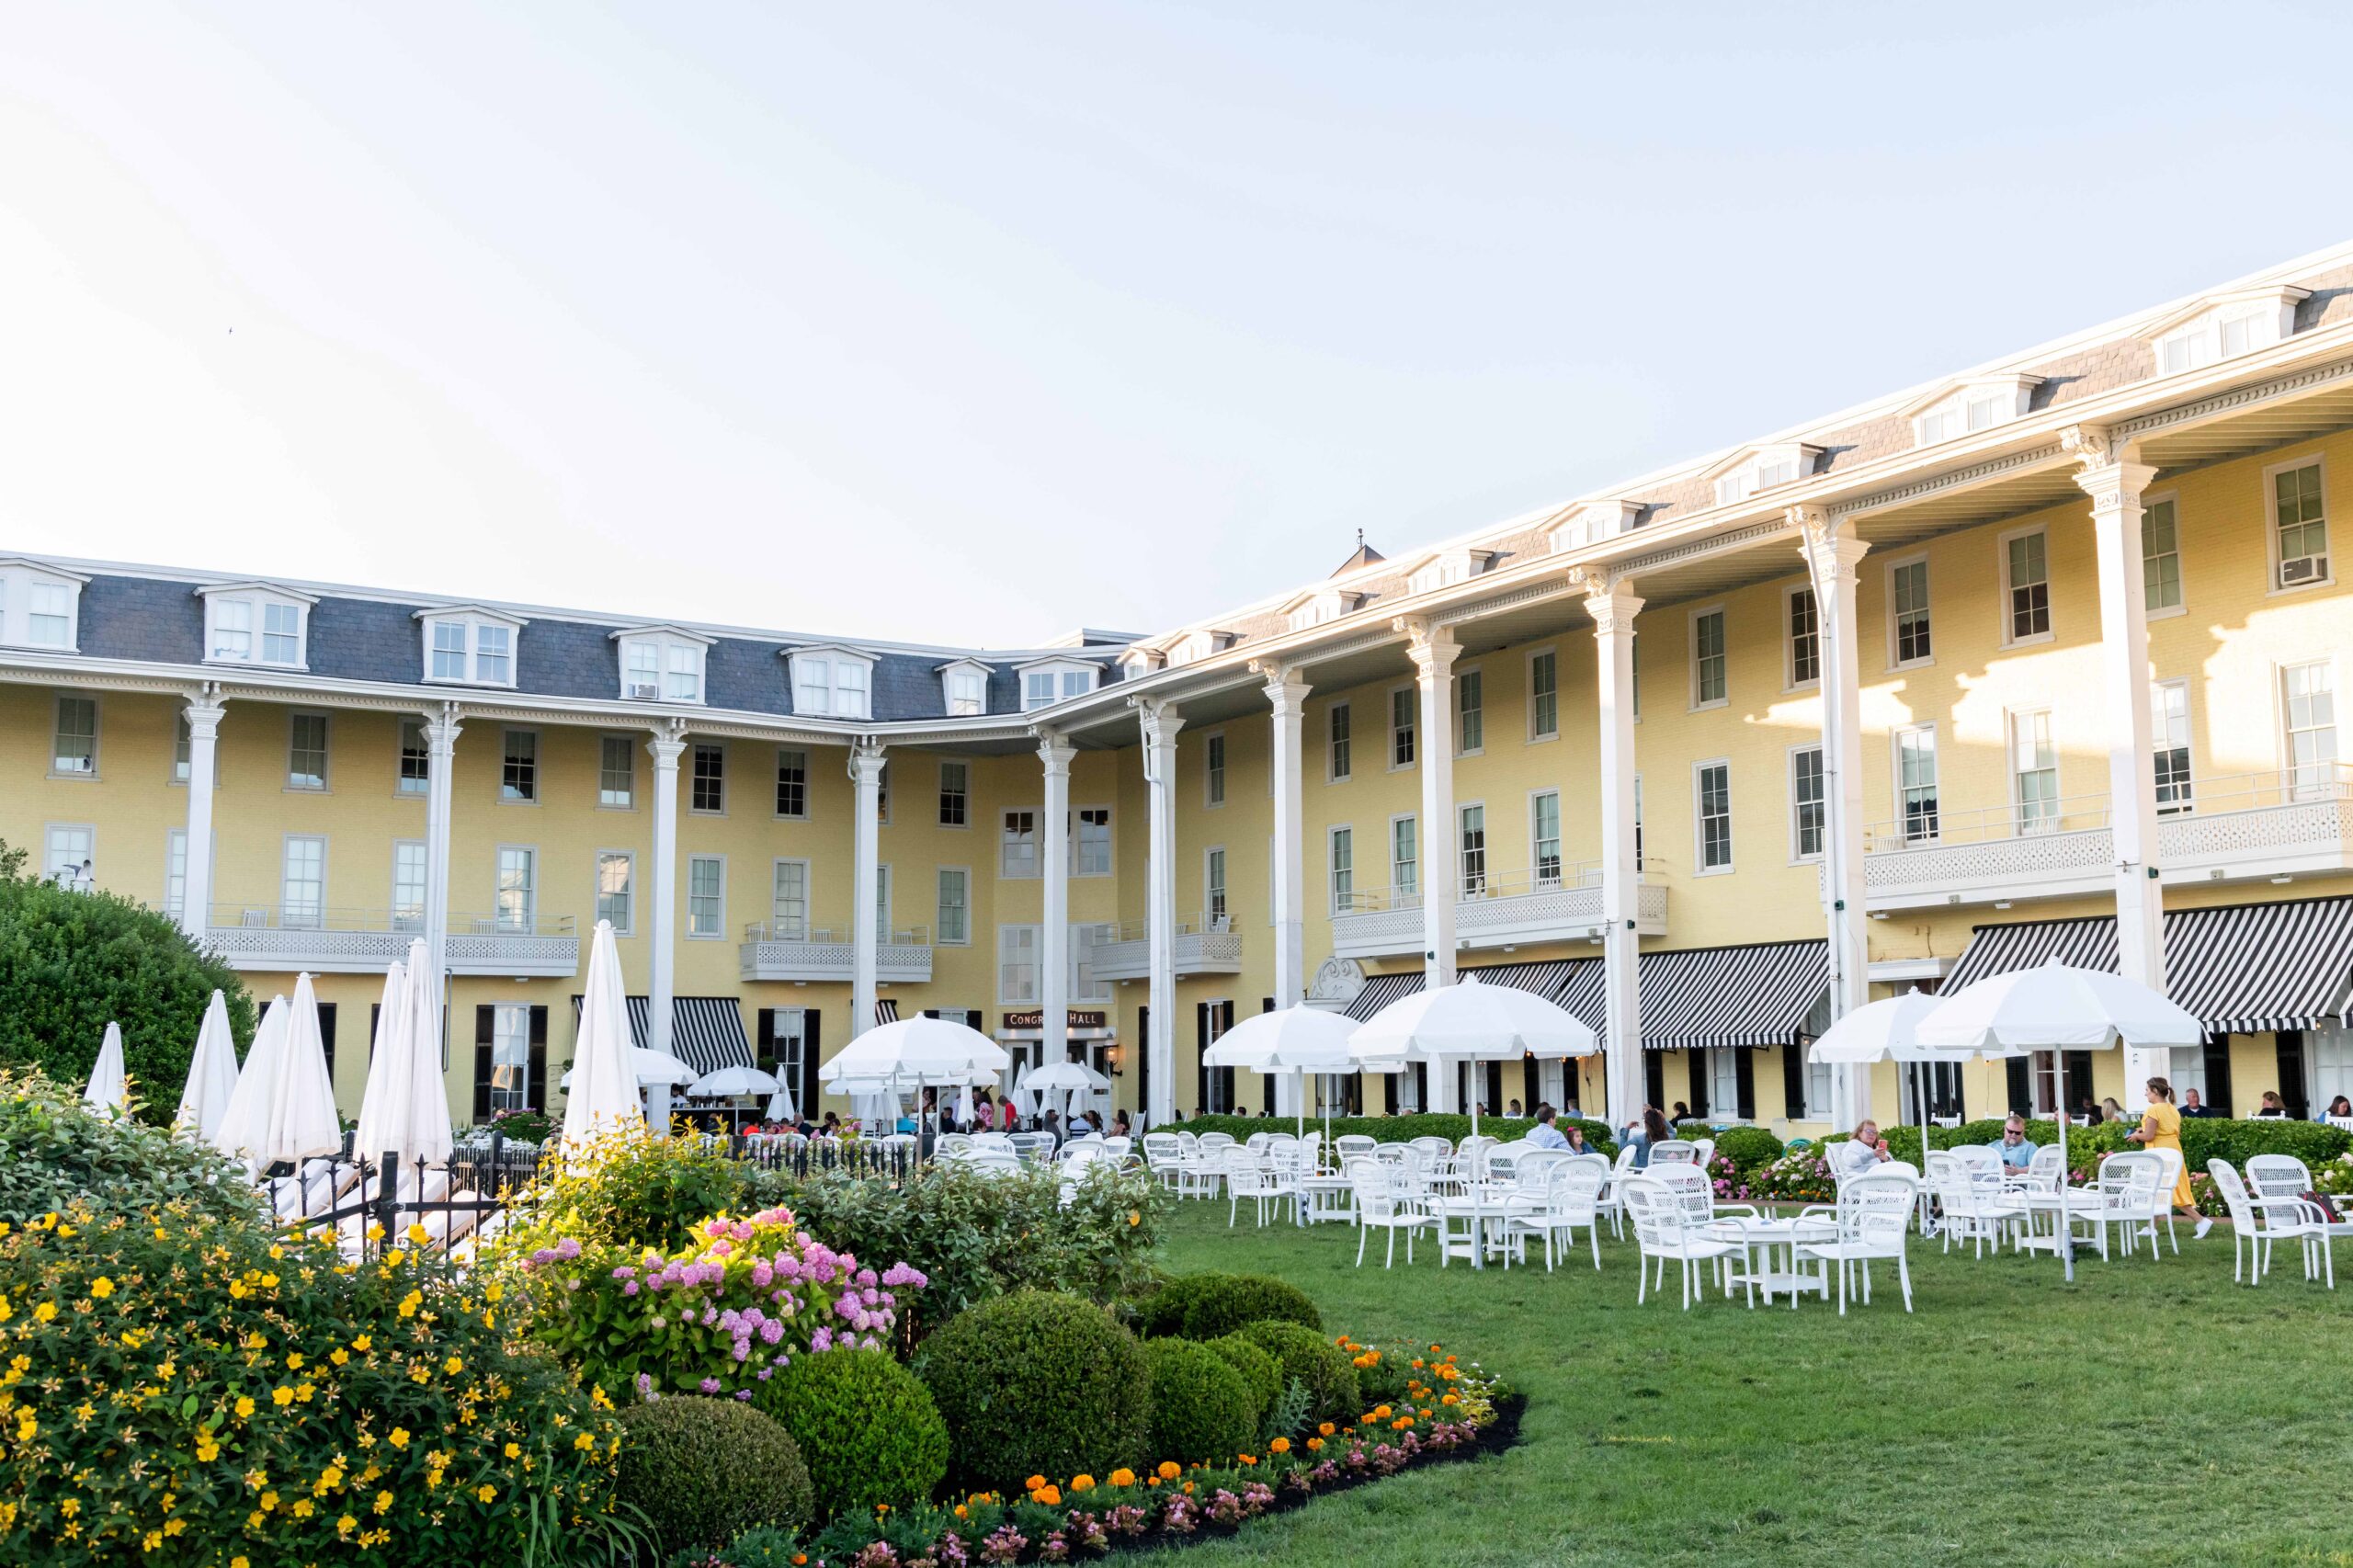 The front lawn of Congress Hall (a yellow L shaped Victorian hotel with white pillars) with white tables, chairs and umbrellas and flowers on a sunny day